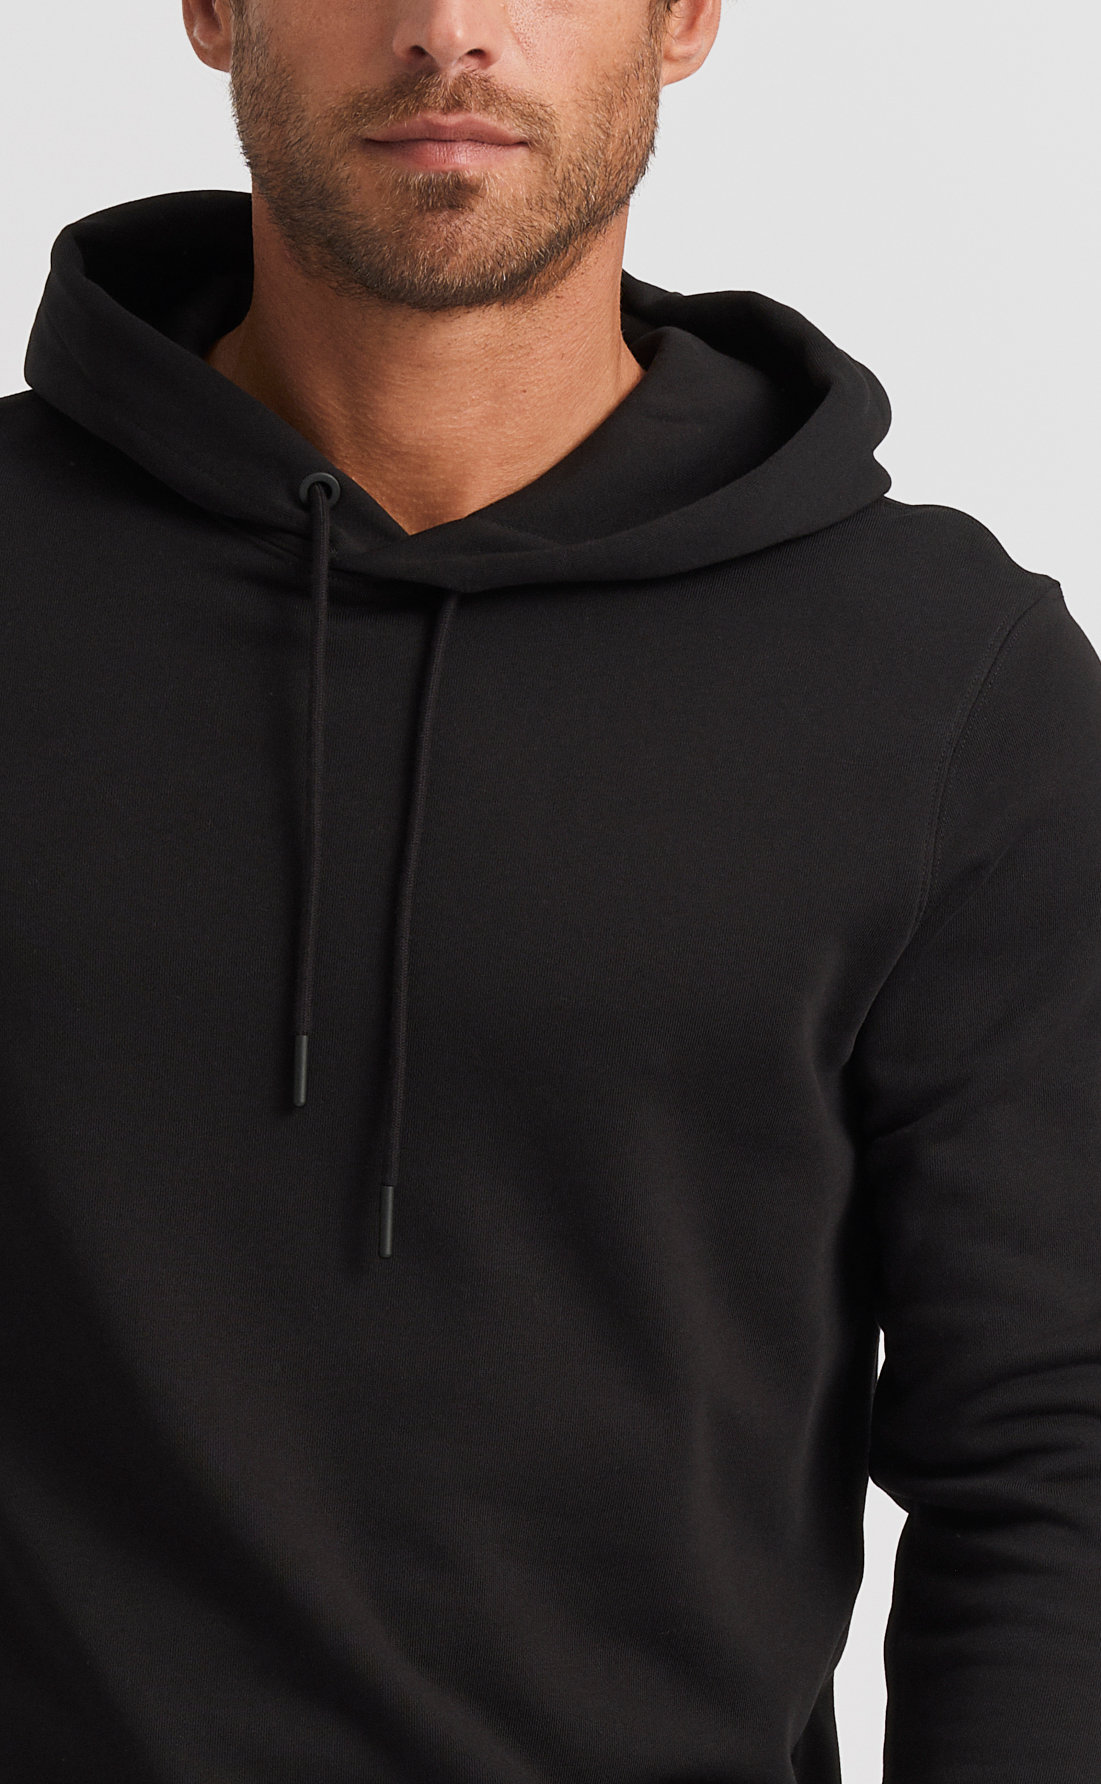 Cotton Black Men Custom Printed Hoodies, For Promotion at Rs 999